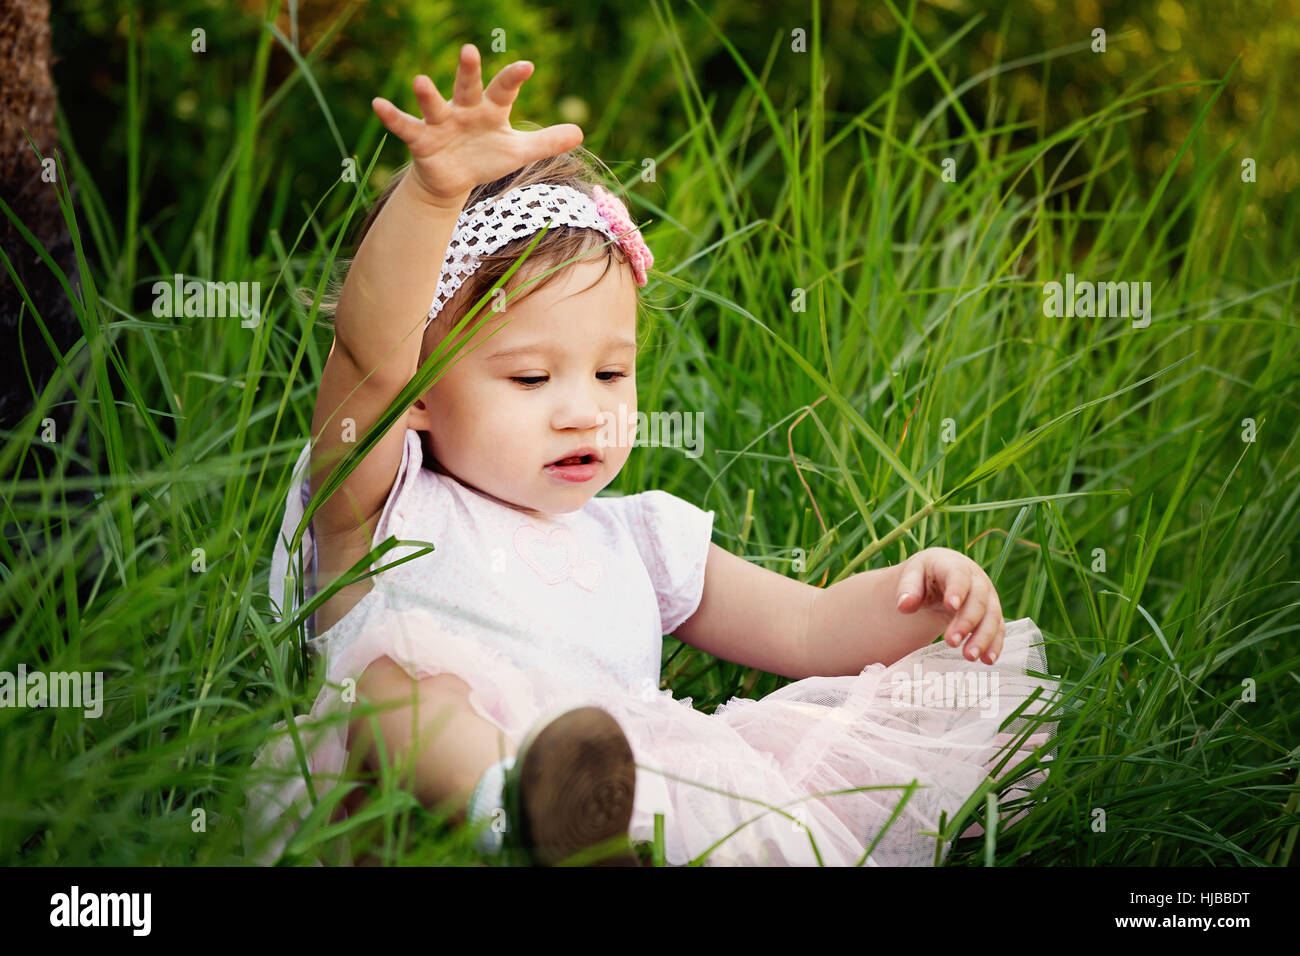 Cute little toddler having fun in the grass Stock Photo